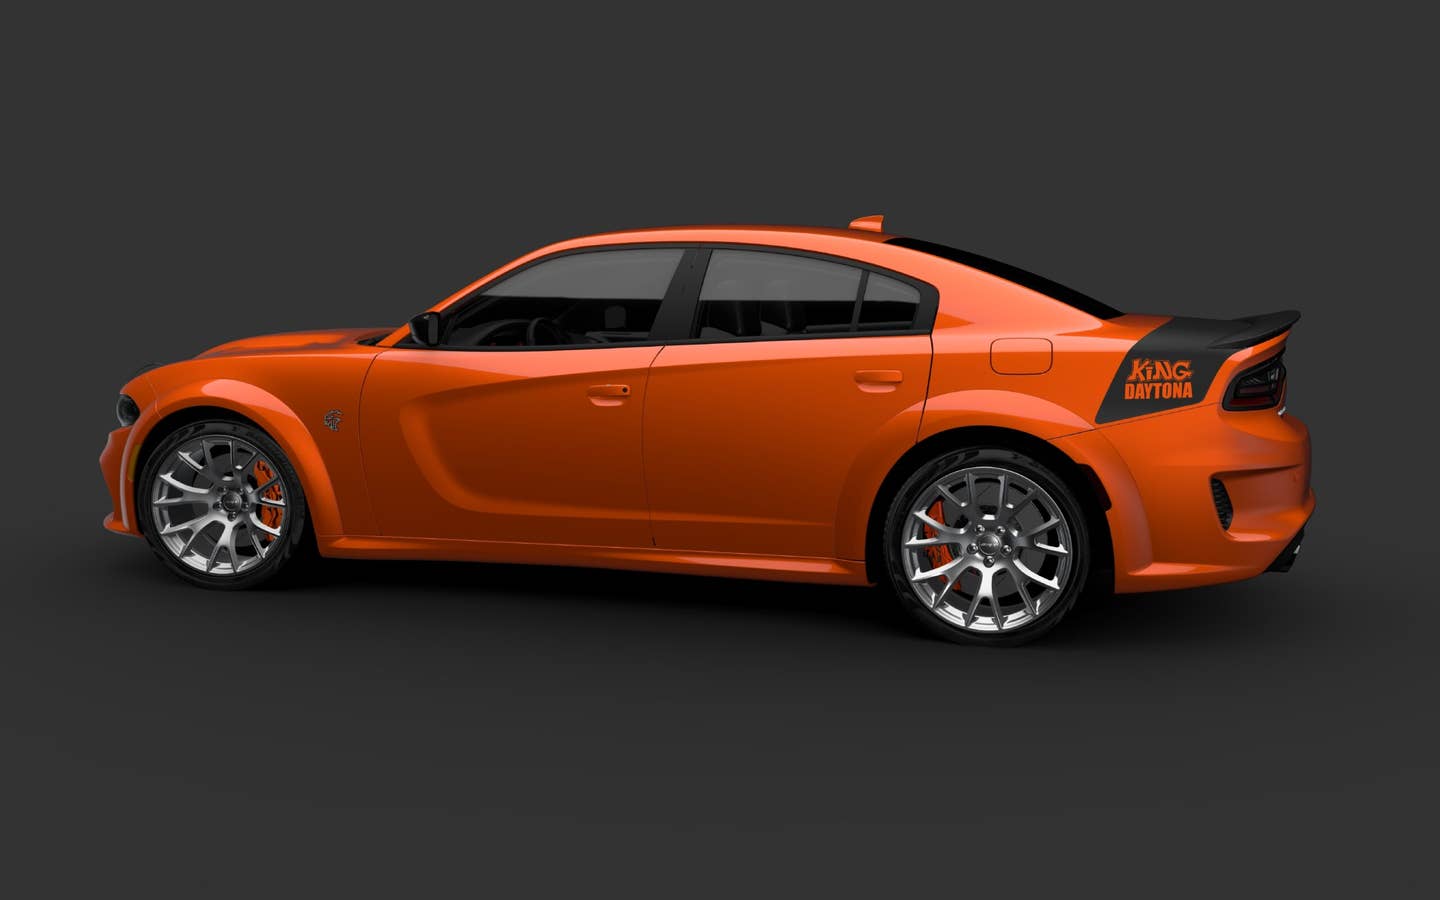 The Dodge brand’s “Last Call” lineup heads into the homestretch with a special-edition Dodge vehicle that owns a royal racing pedigree: the 2023 Dodge Charger King Daytona.